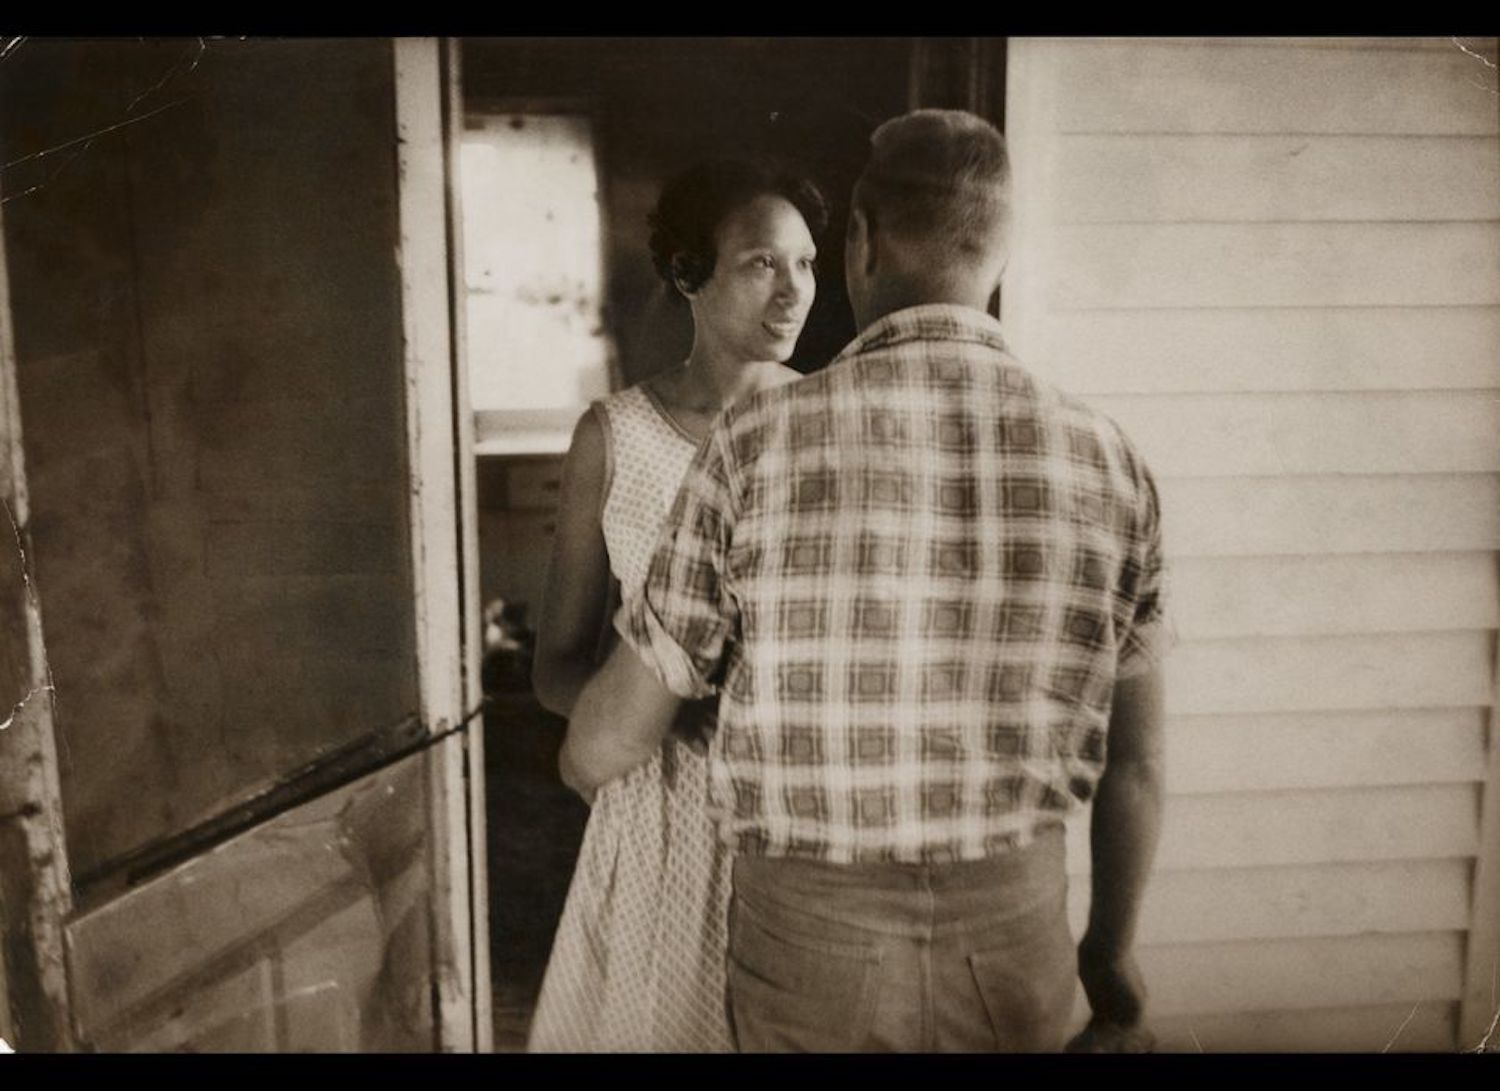 Richard and Mildred Loving Plead Guilty to Marrying Interracially | Equal Justice Initiative